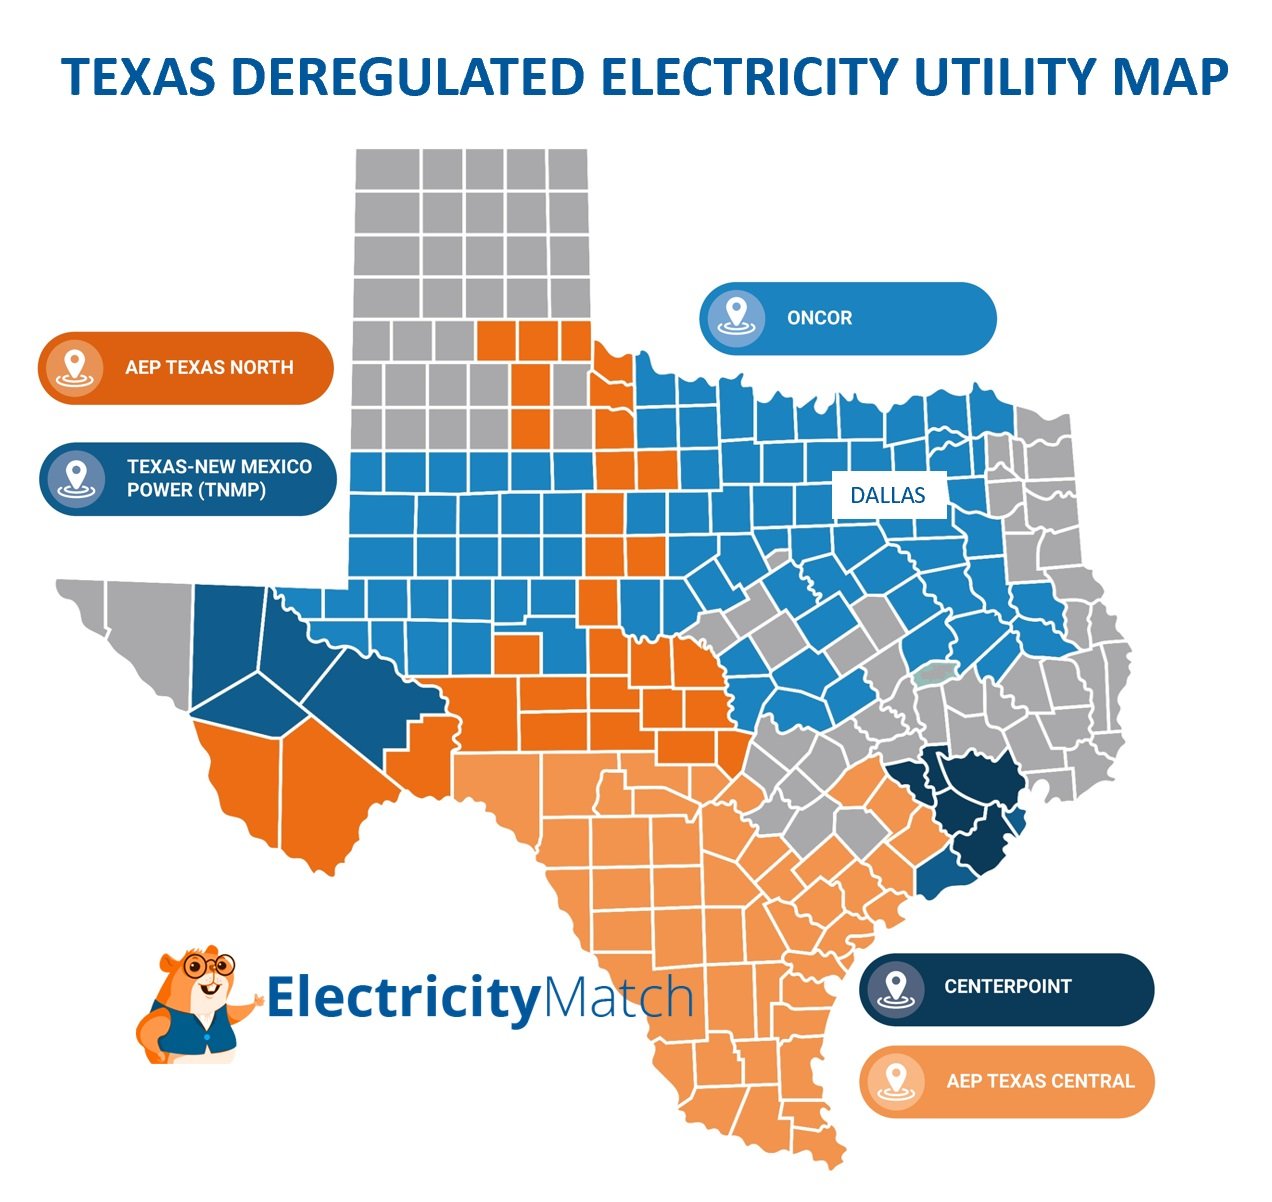 dallas-energy-electricity-guide-electricity-match